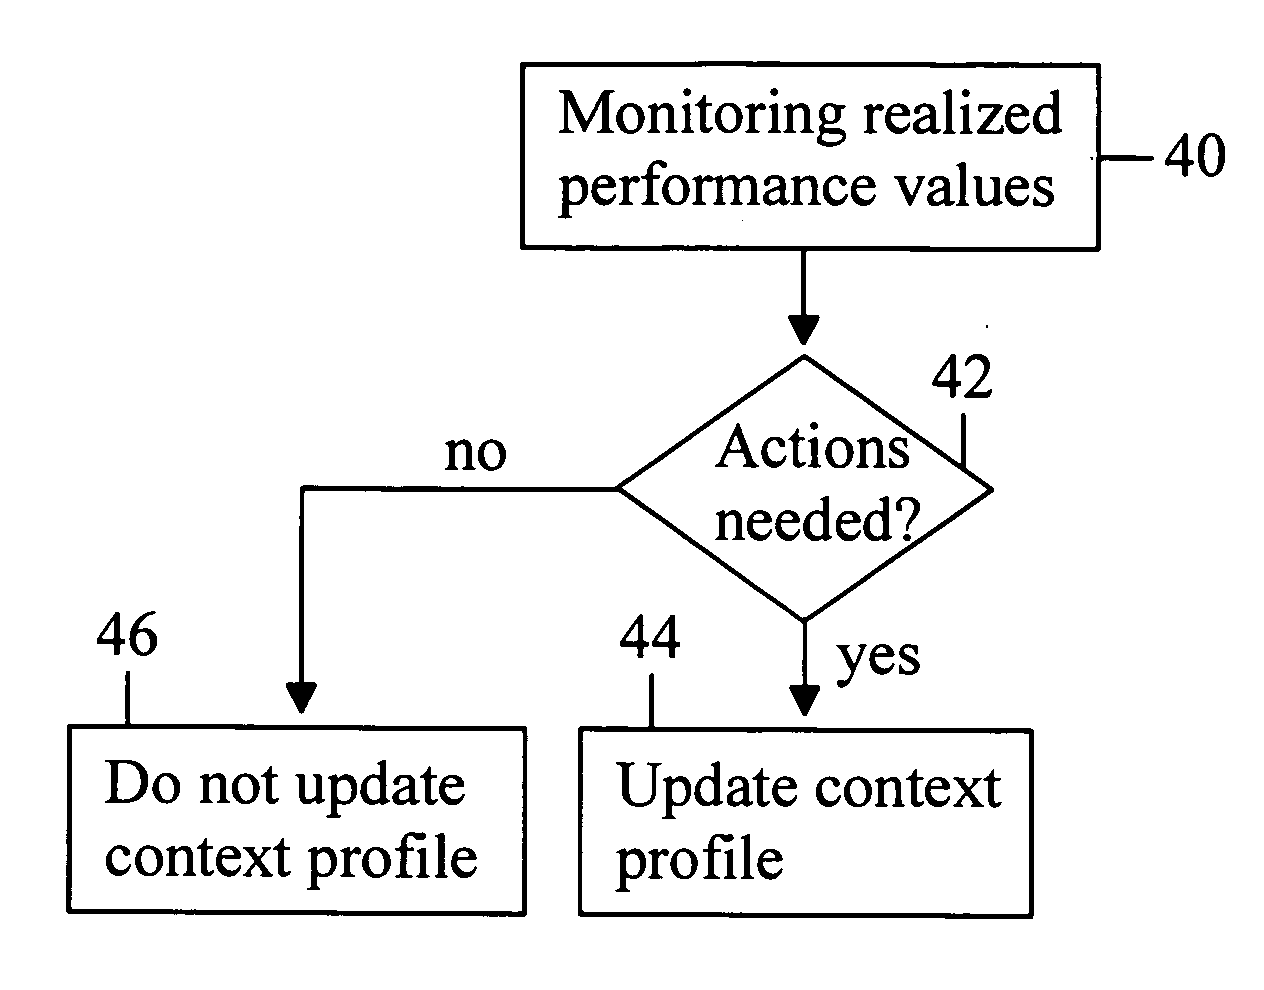 Context profile for data communications